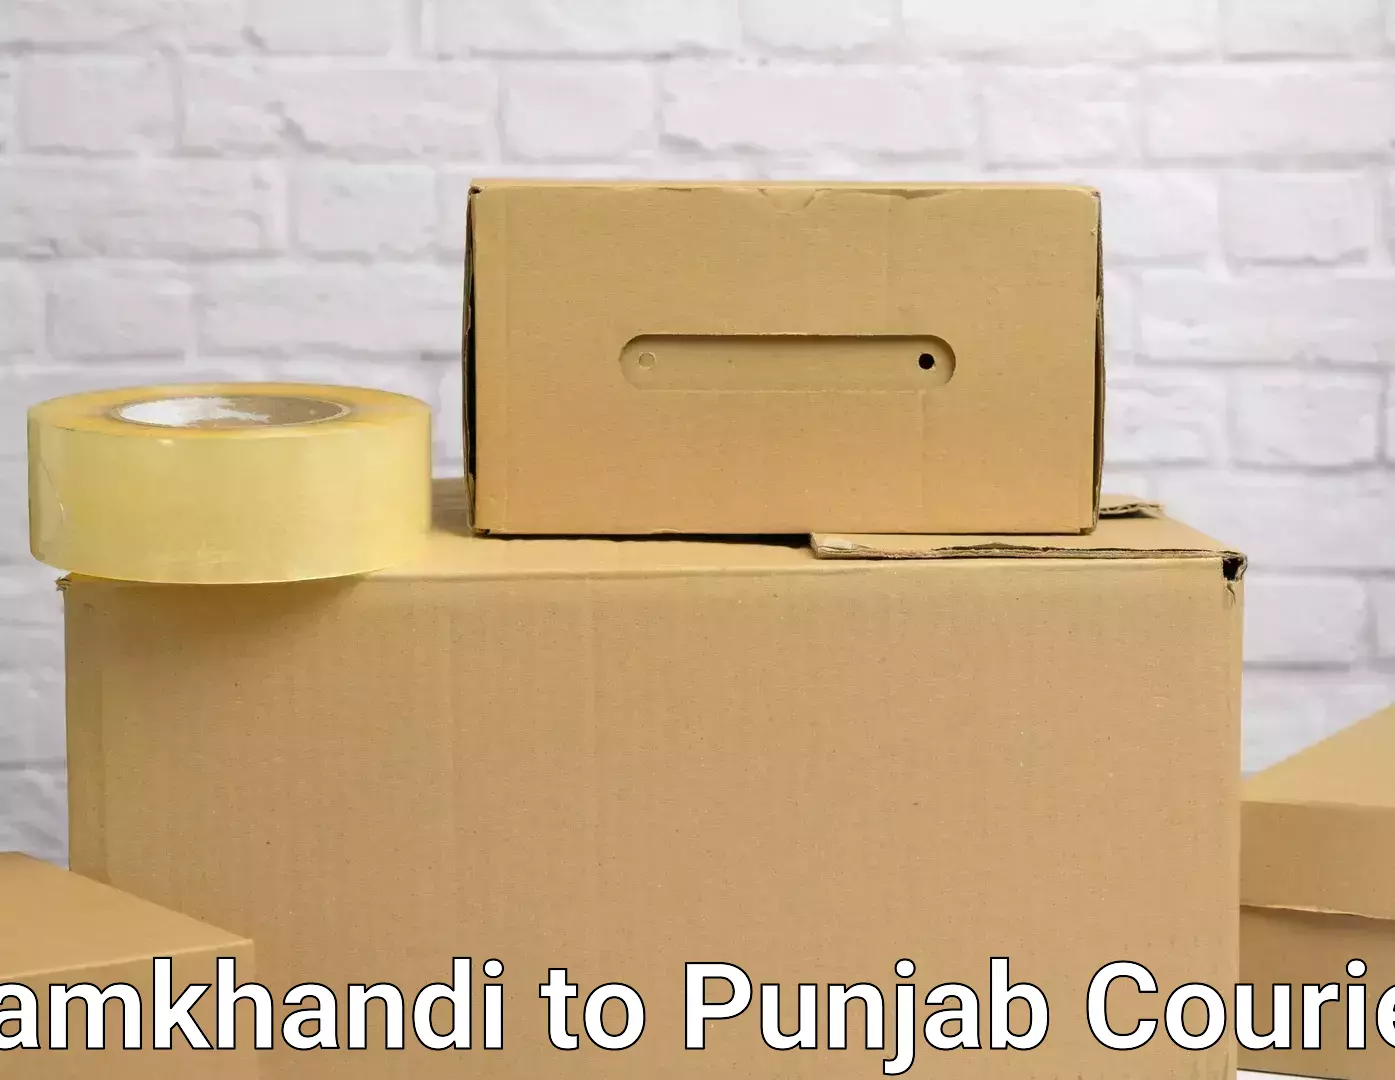 Moving service excellence in Jamkhandi to Punjab